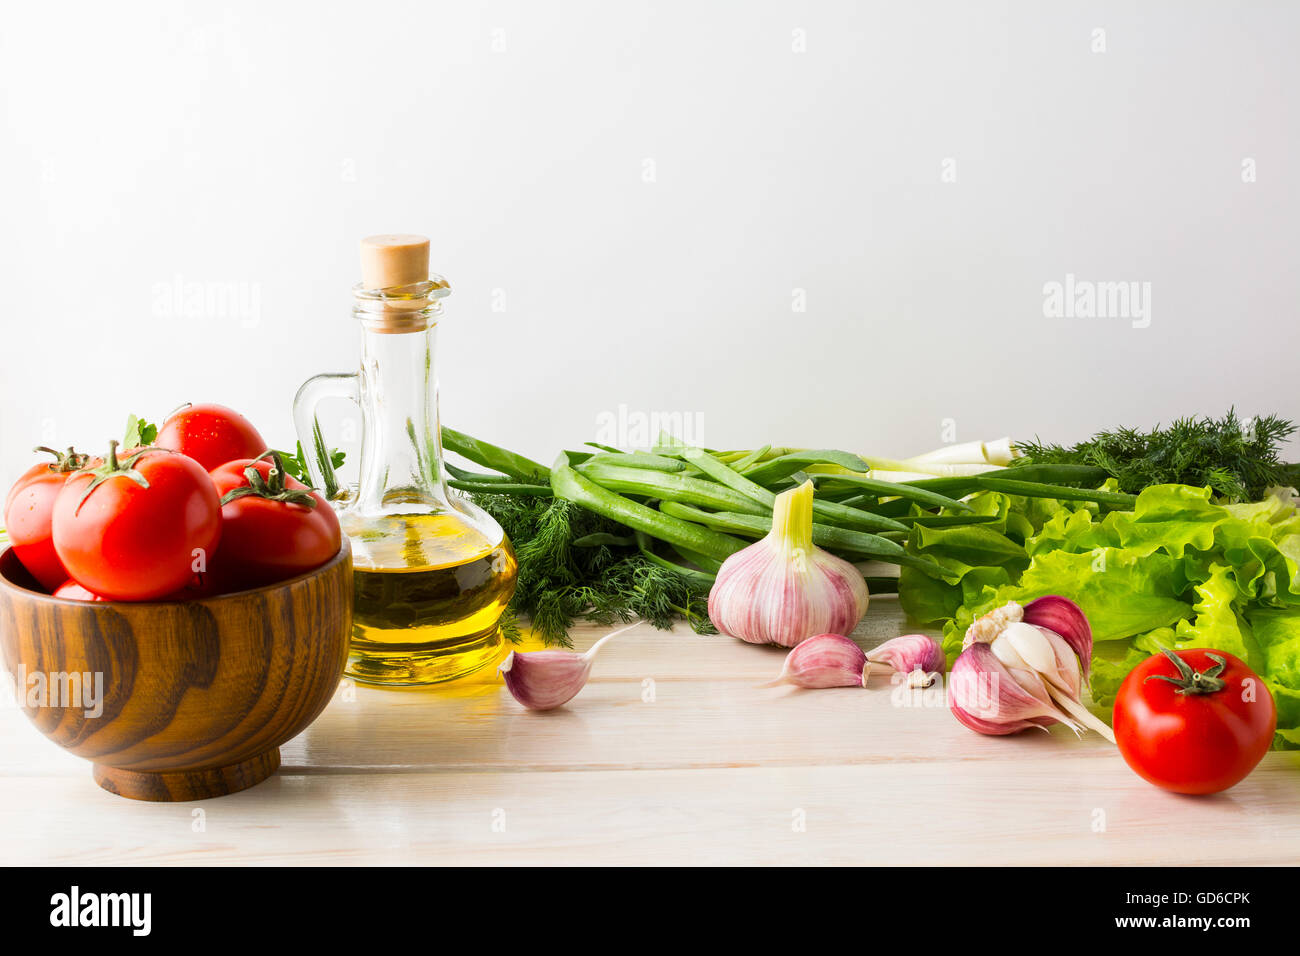 Olive oil, garlic and tomato on the white wooden background. Vegetarian  vegan food background. Healthy eating concept with fres Stock Photo